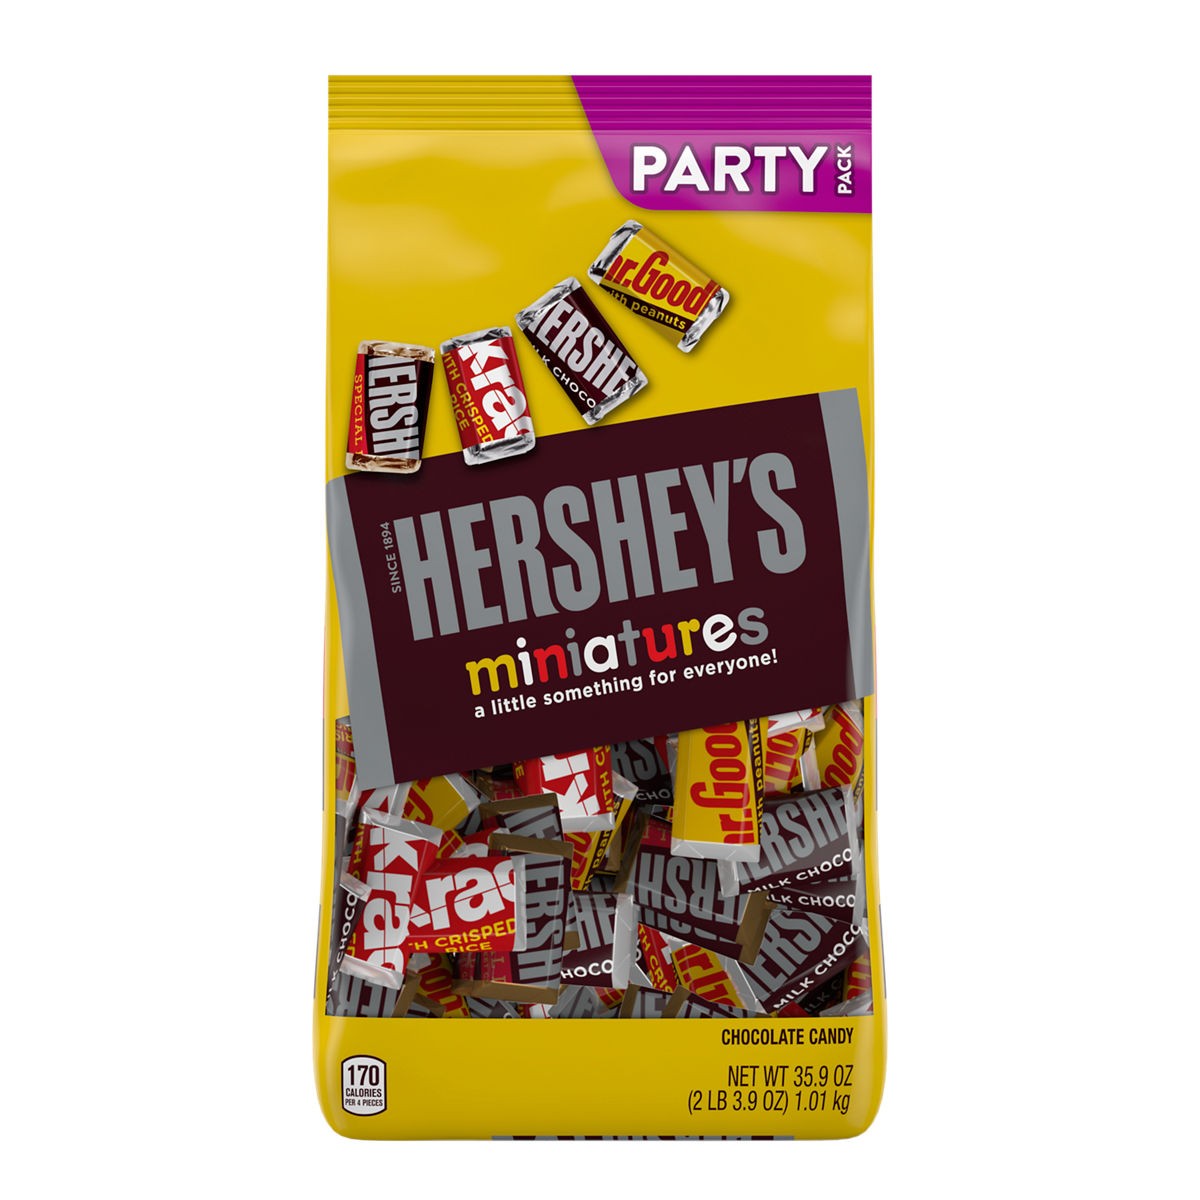 candy bars for parties